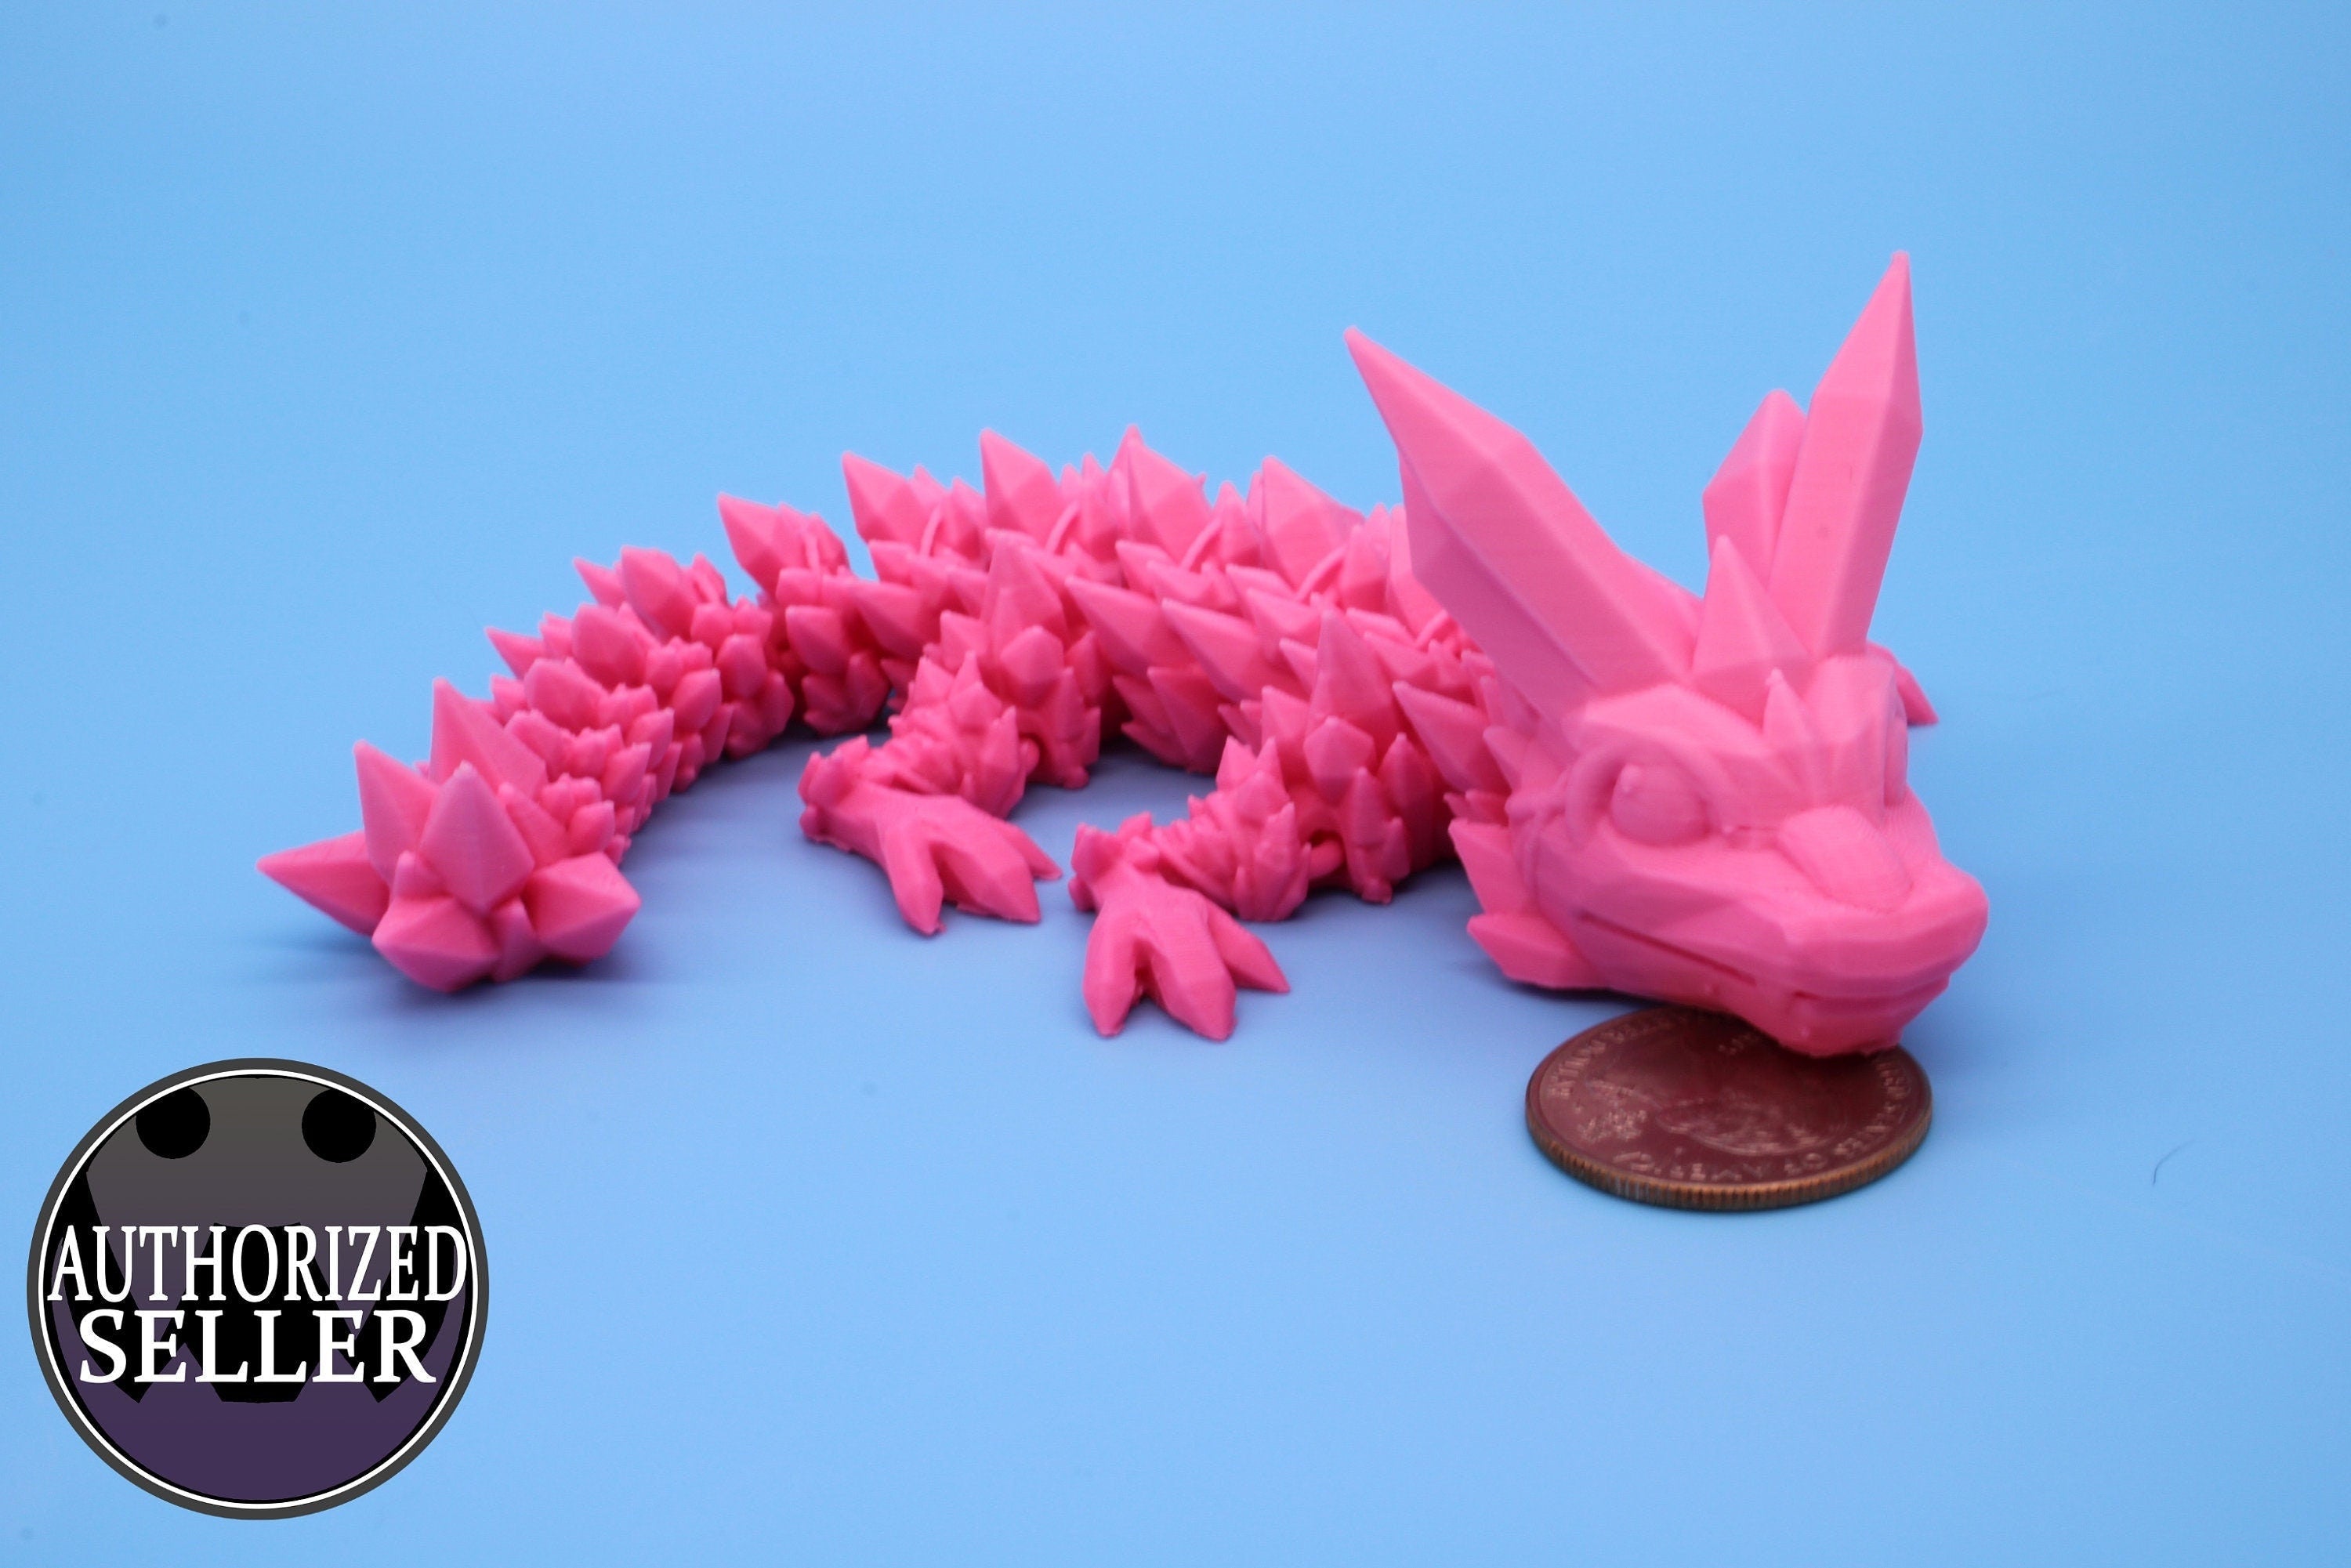 Baby Crystal Dragon- Pink, Miniature, 3D Printed, 7 in.